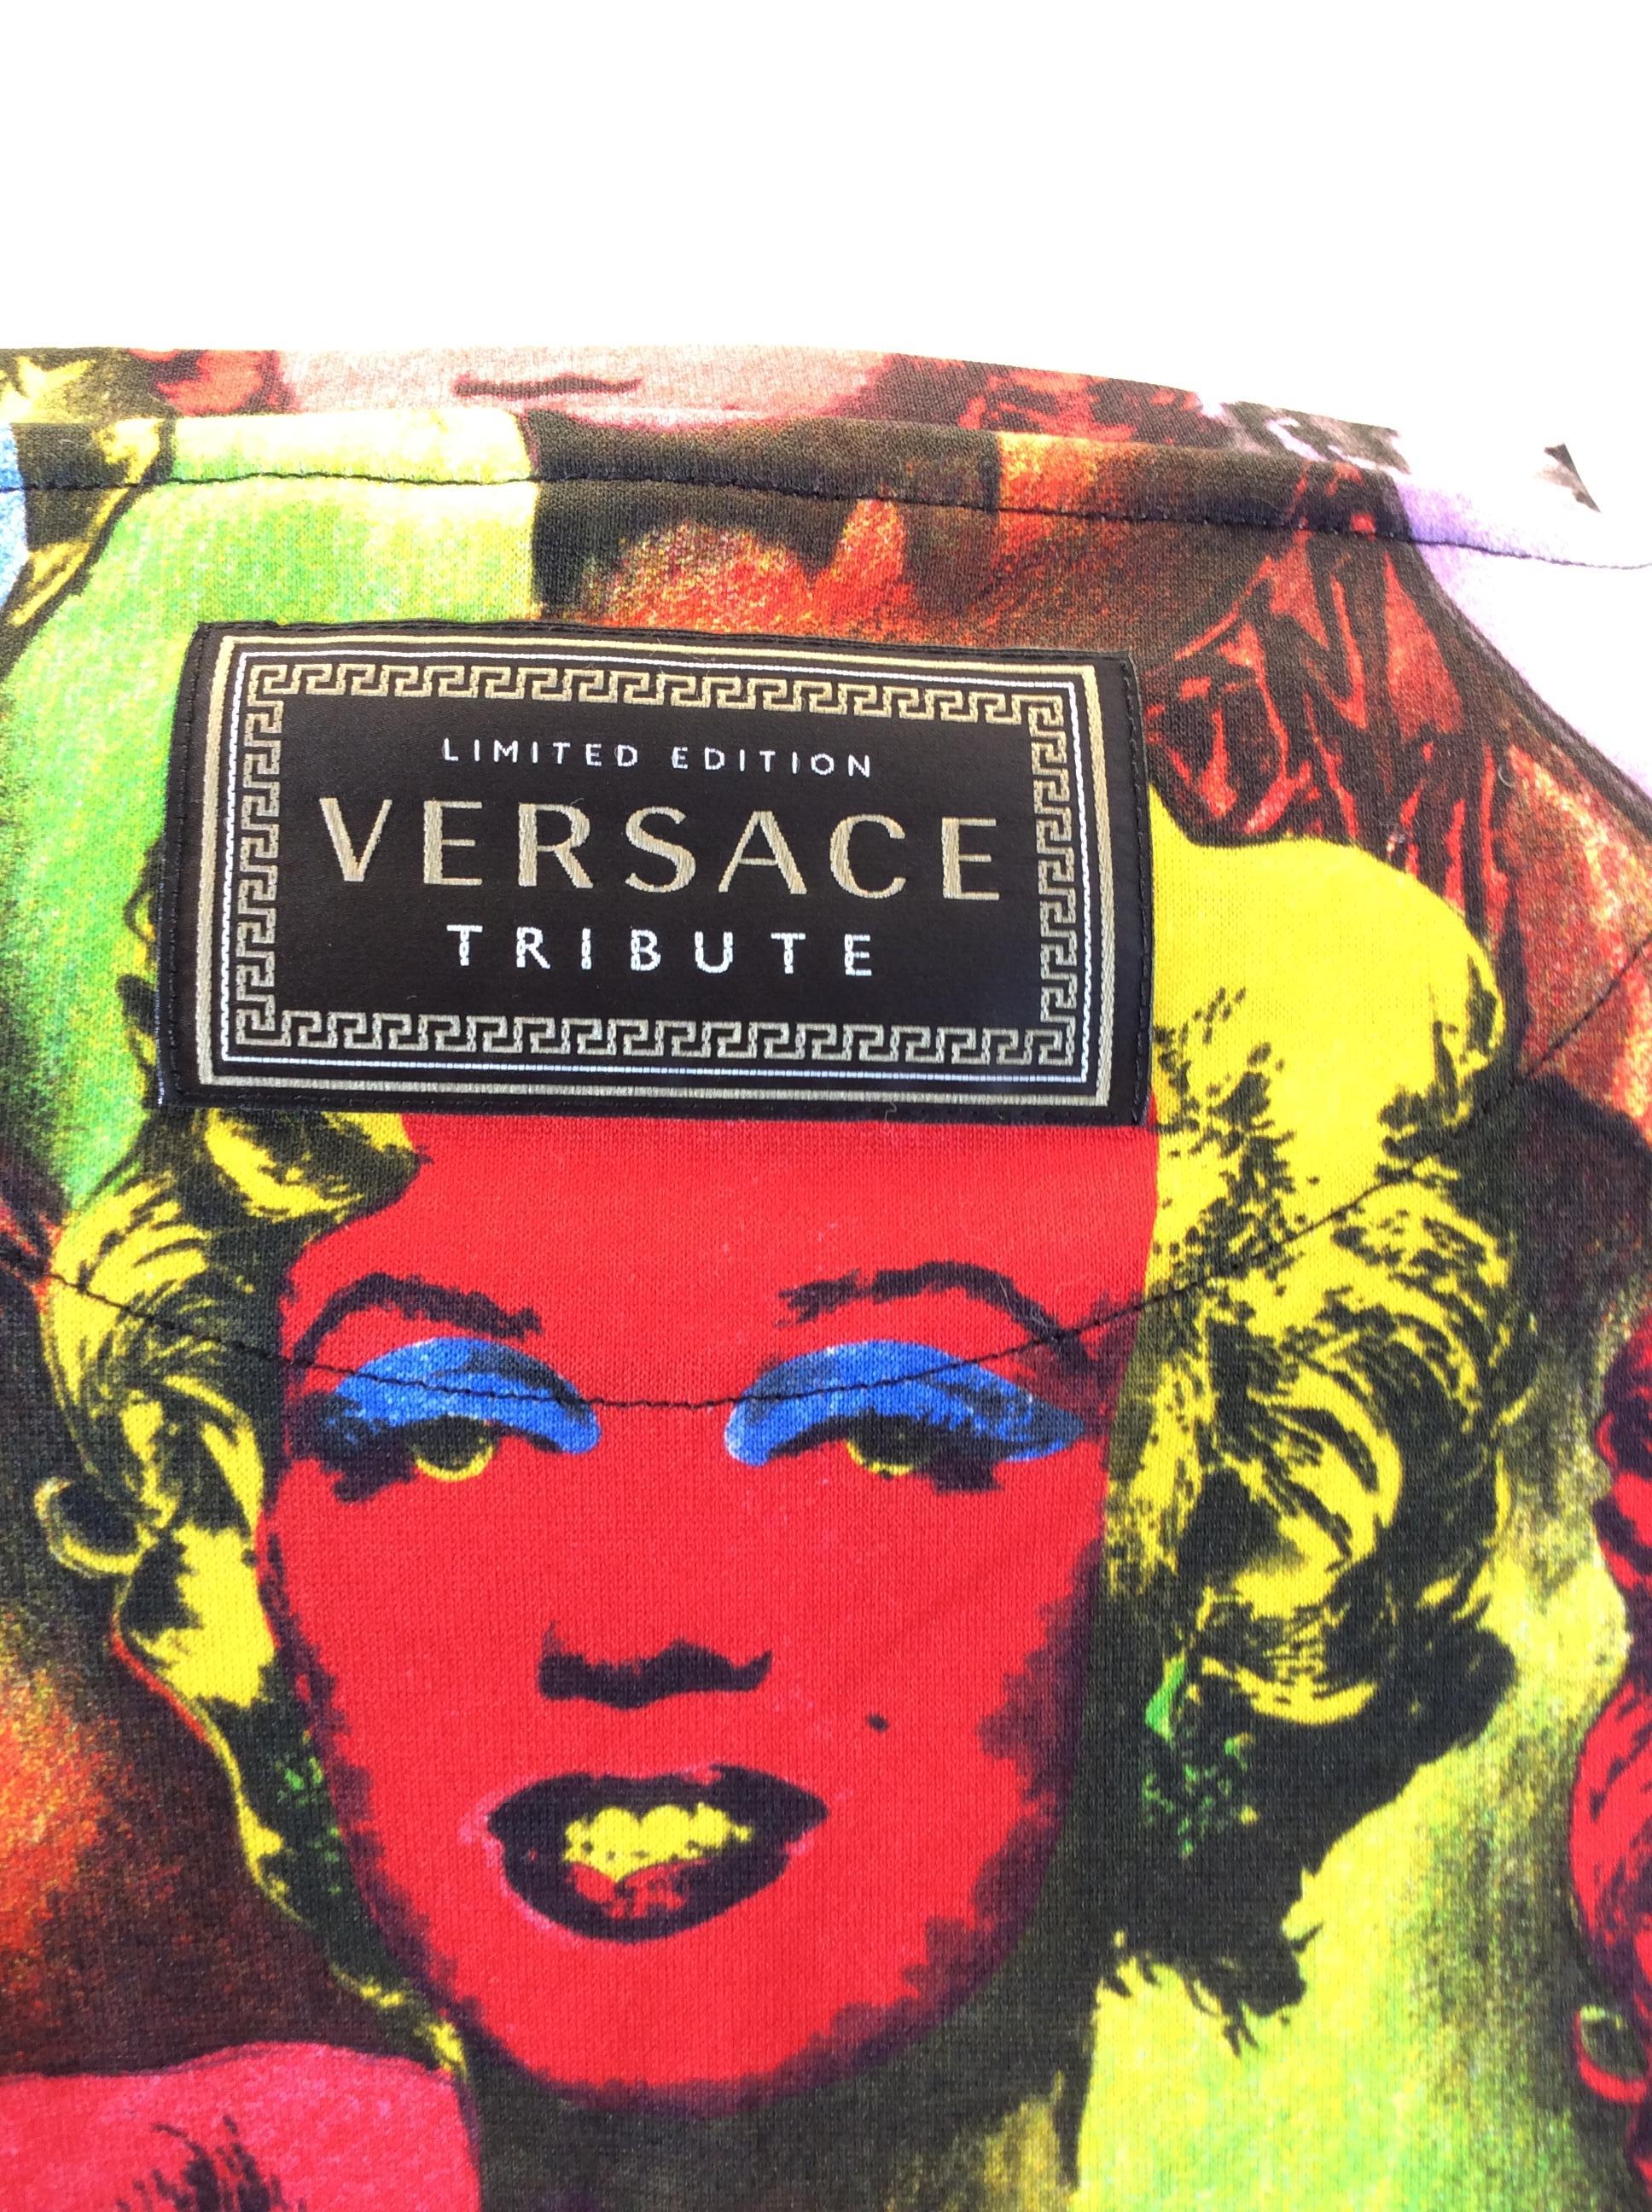 Brown Versace Limited Edition Andy Warhol Tribute Shirt